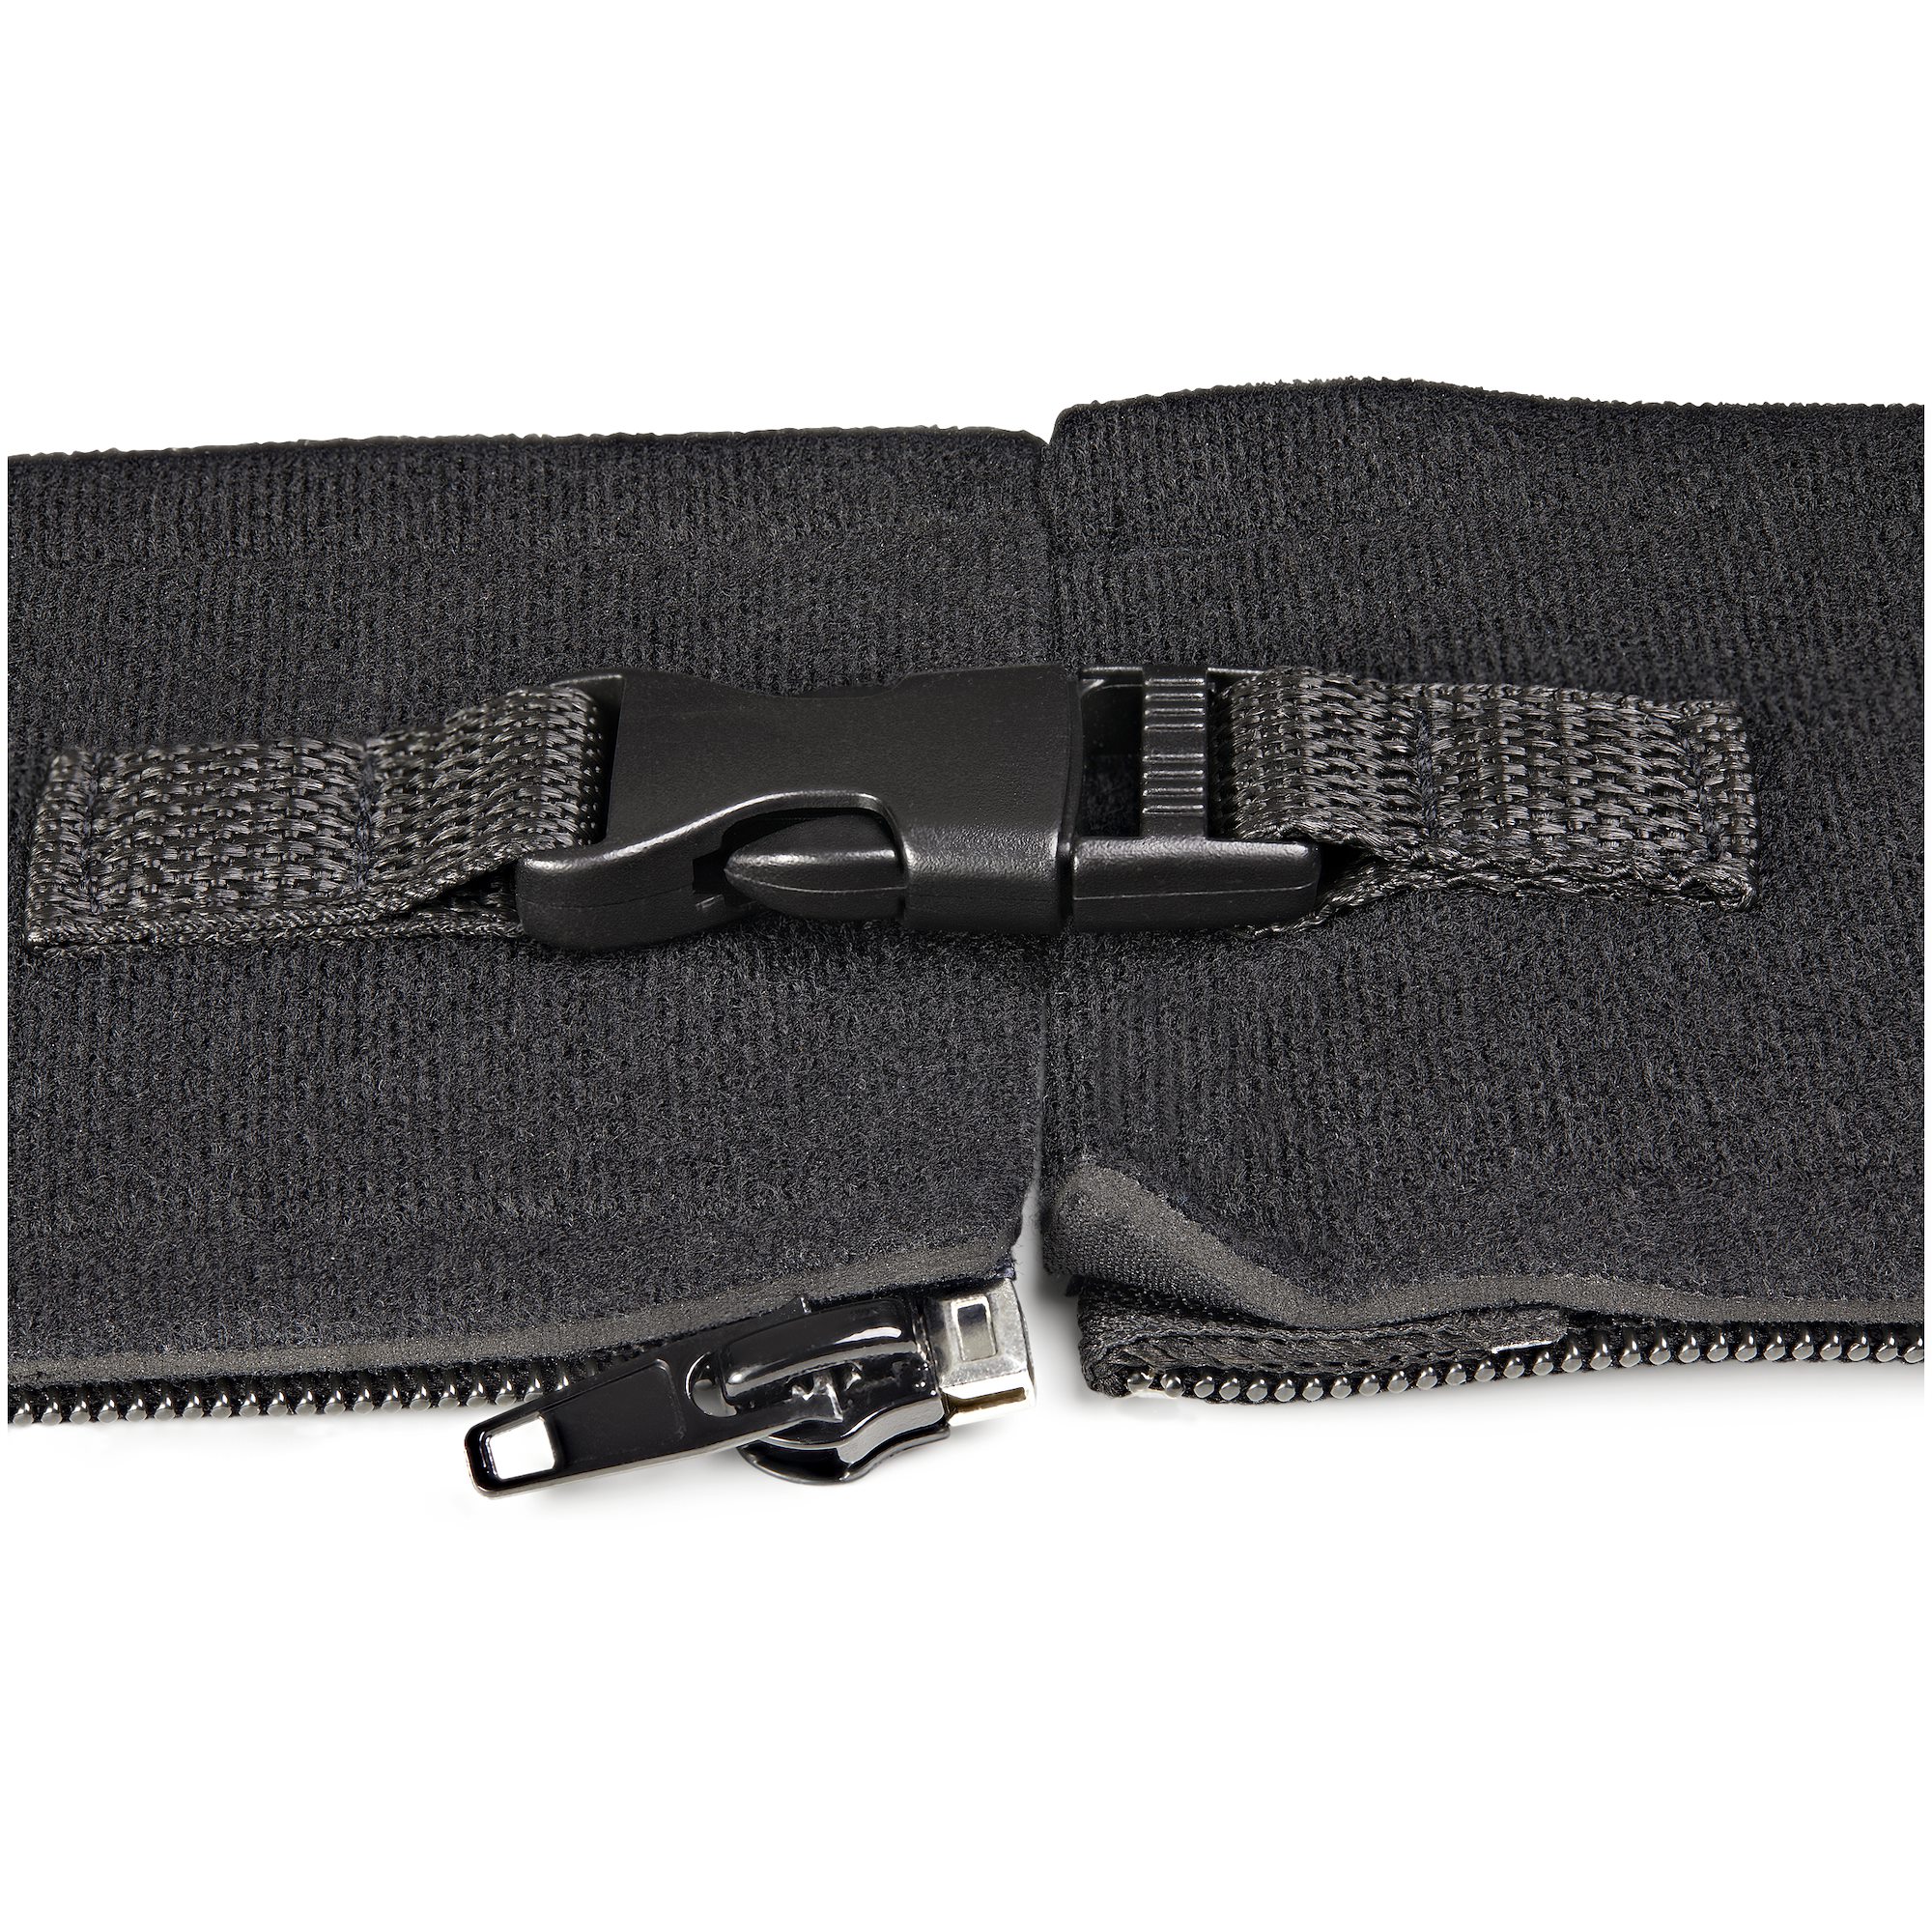 1m Neoprene Cable Management Sleeve - Cable Routing Solutions, Cables